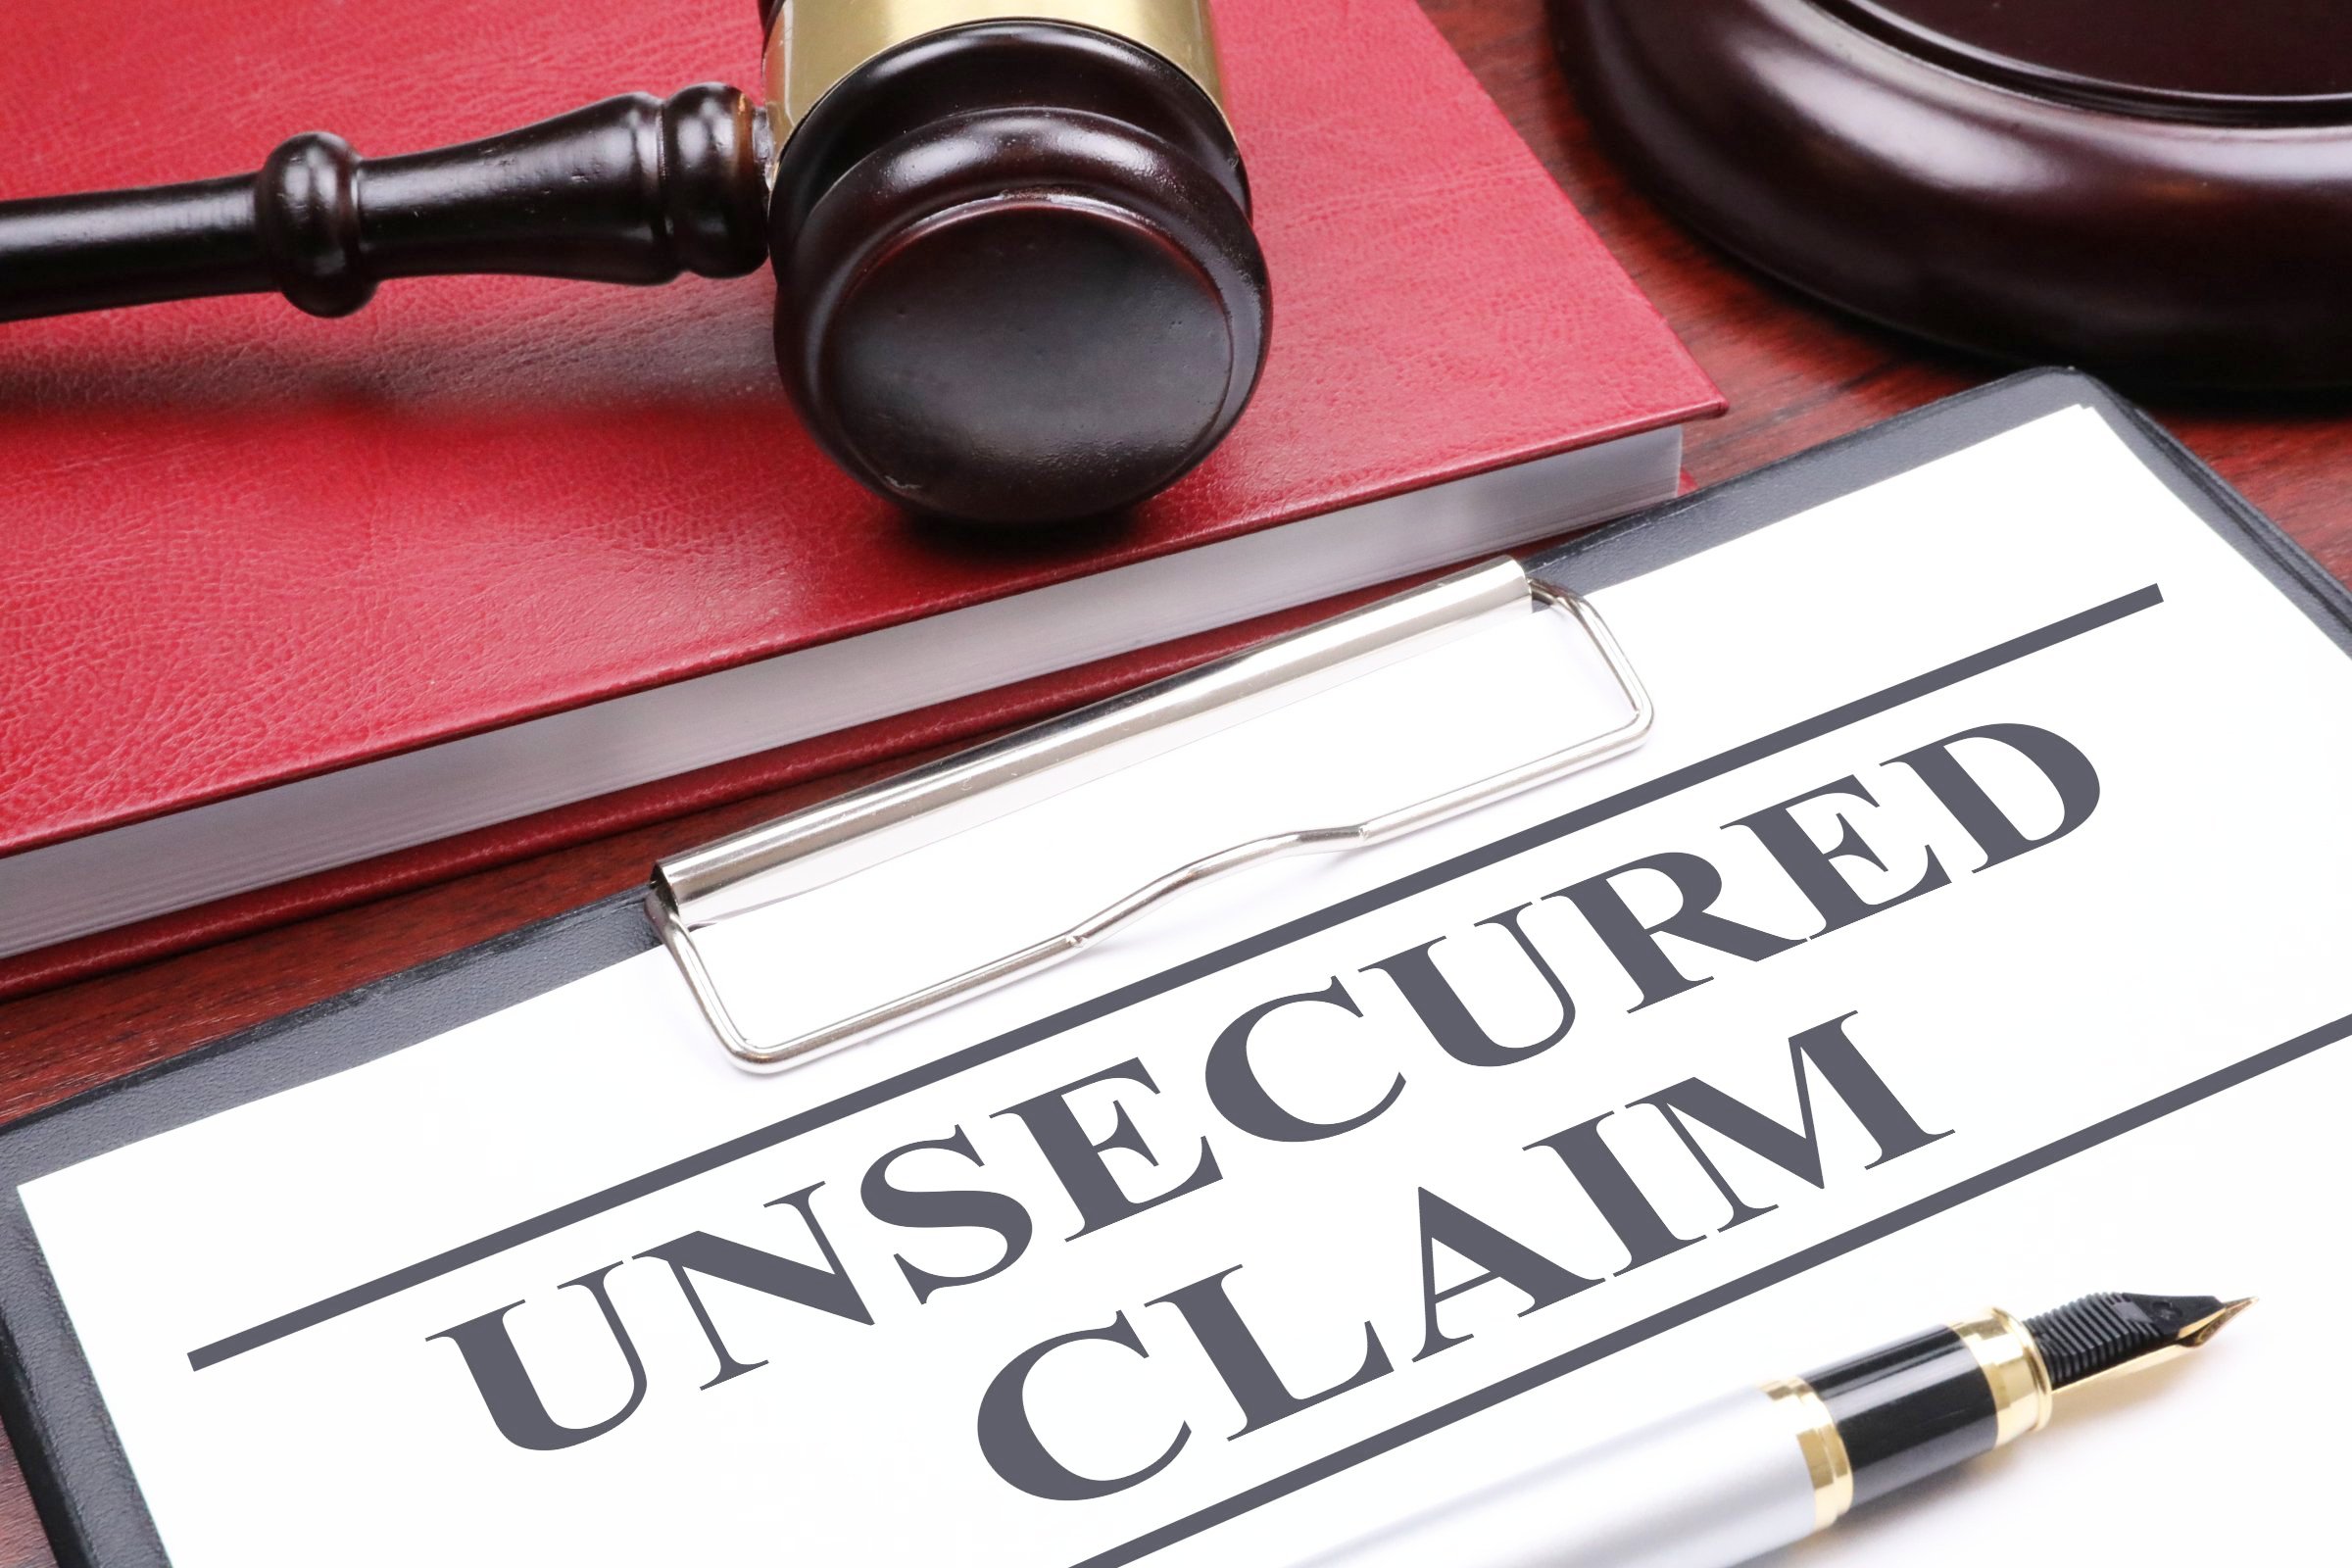 unsecured claim